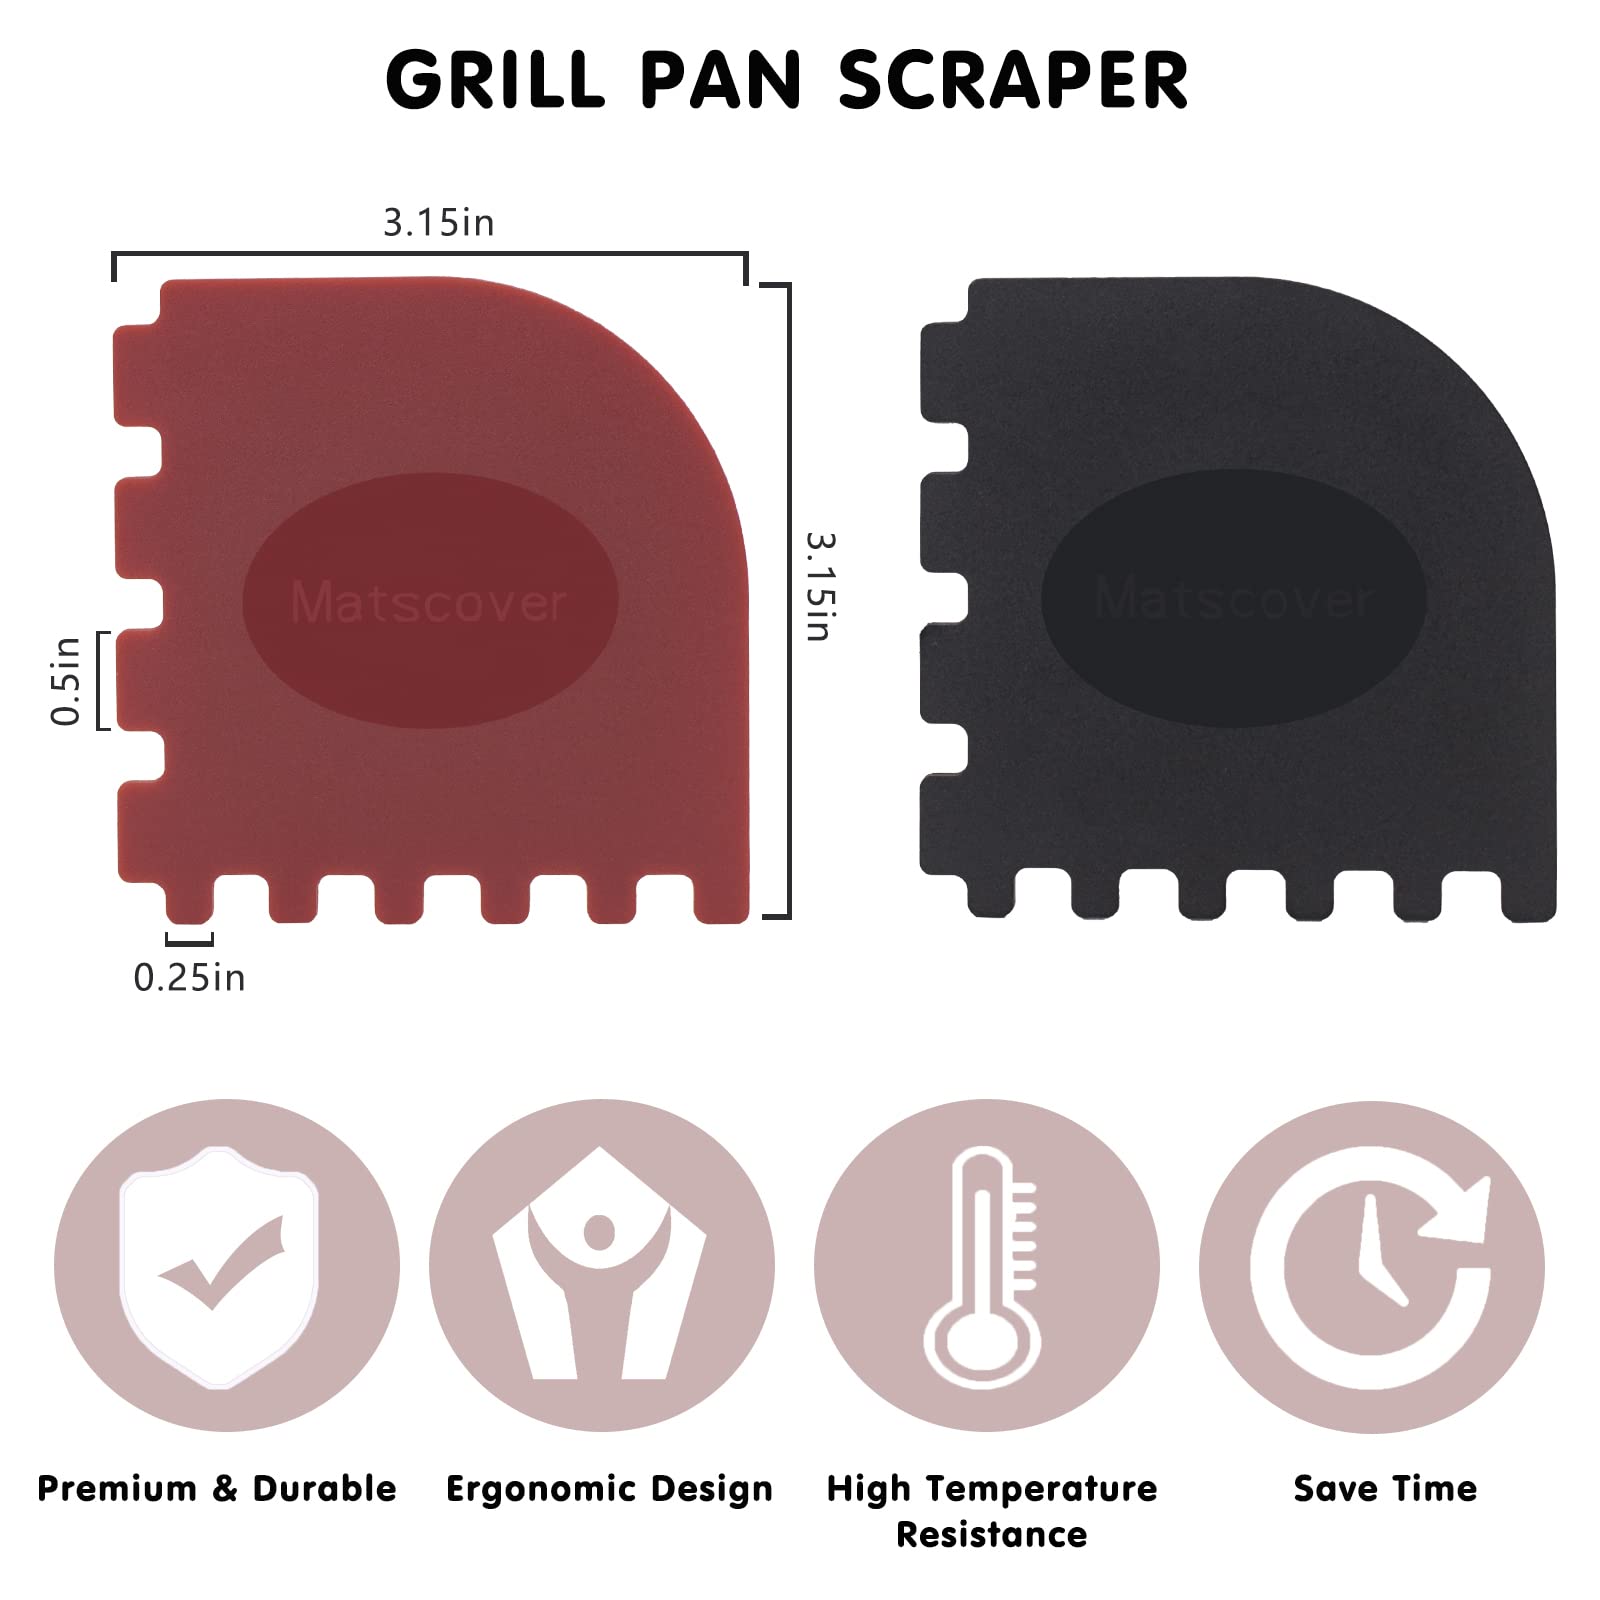 Matscover Grill Pan Scrapers, Cast Iron Scraper with Built-In Adsorption Gadget, Pot Scraper Non Scratch for Cast Iron Skillet, Frying Pans and Griddles Cleaning, Red and Black, 4 Pack